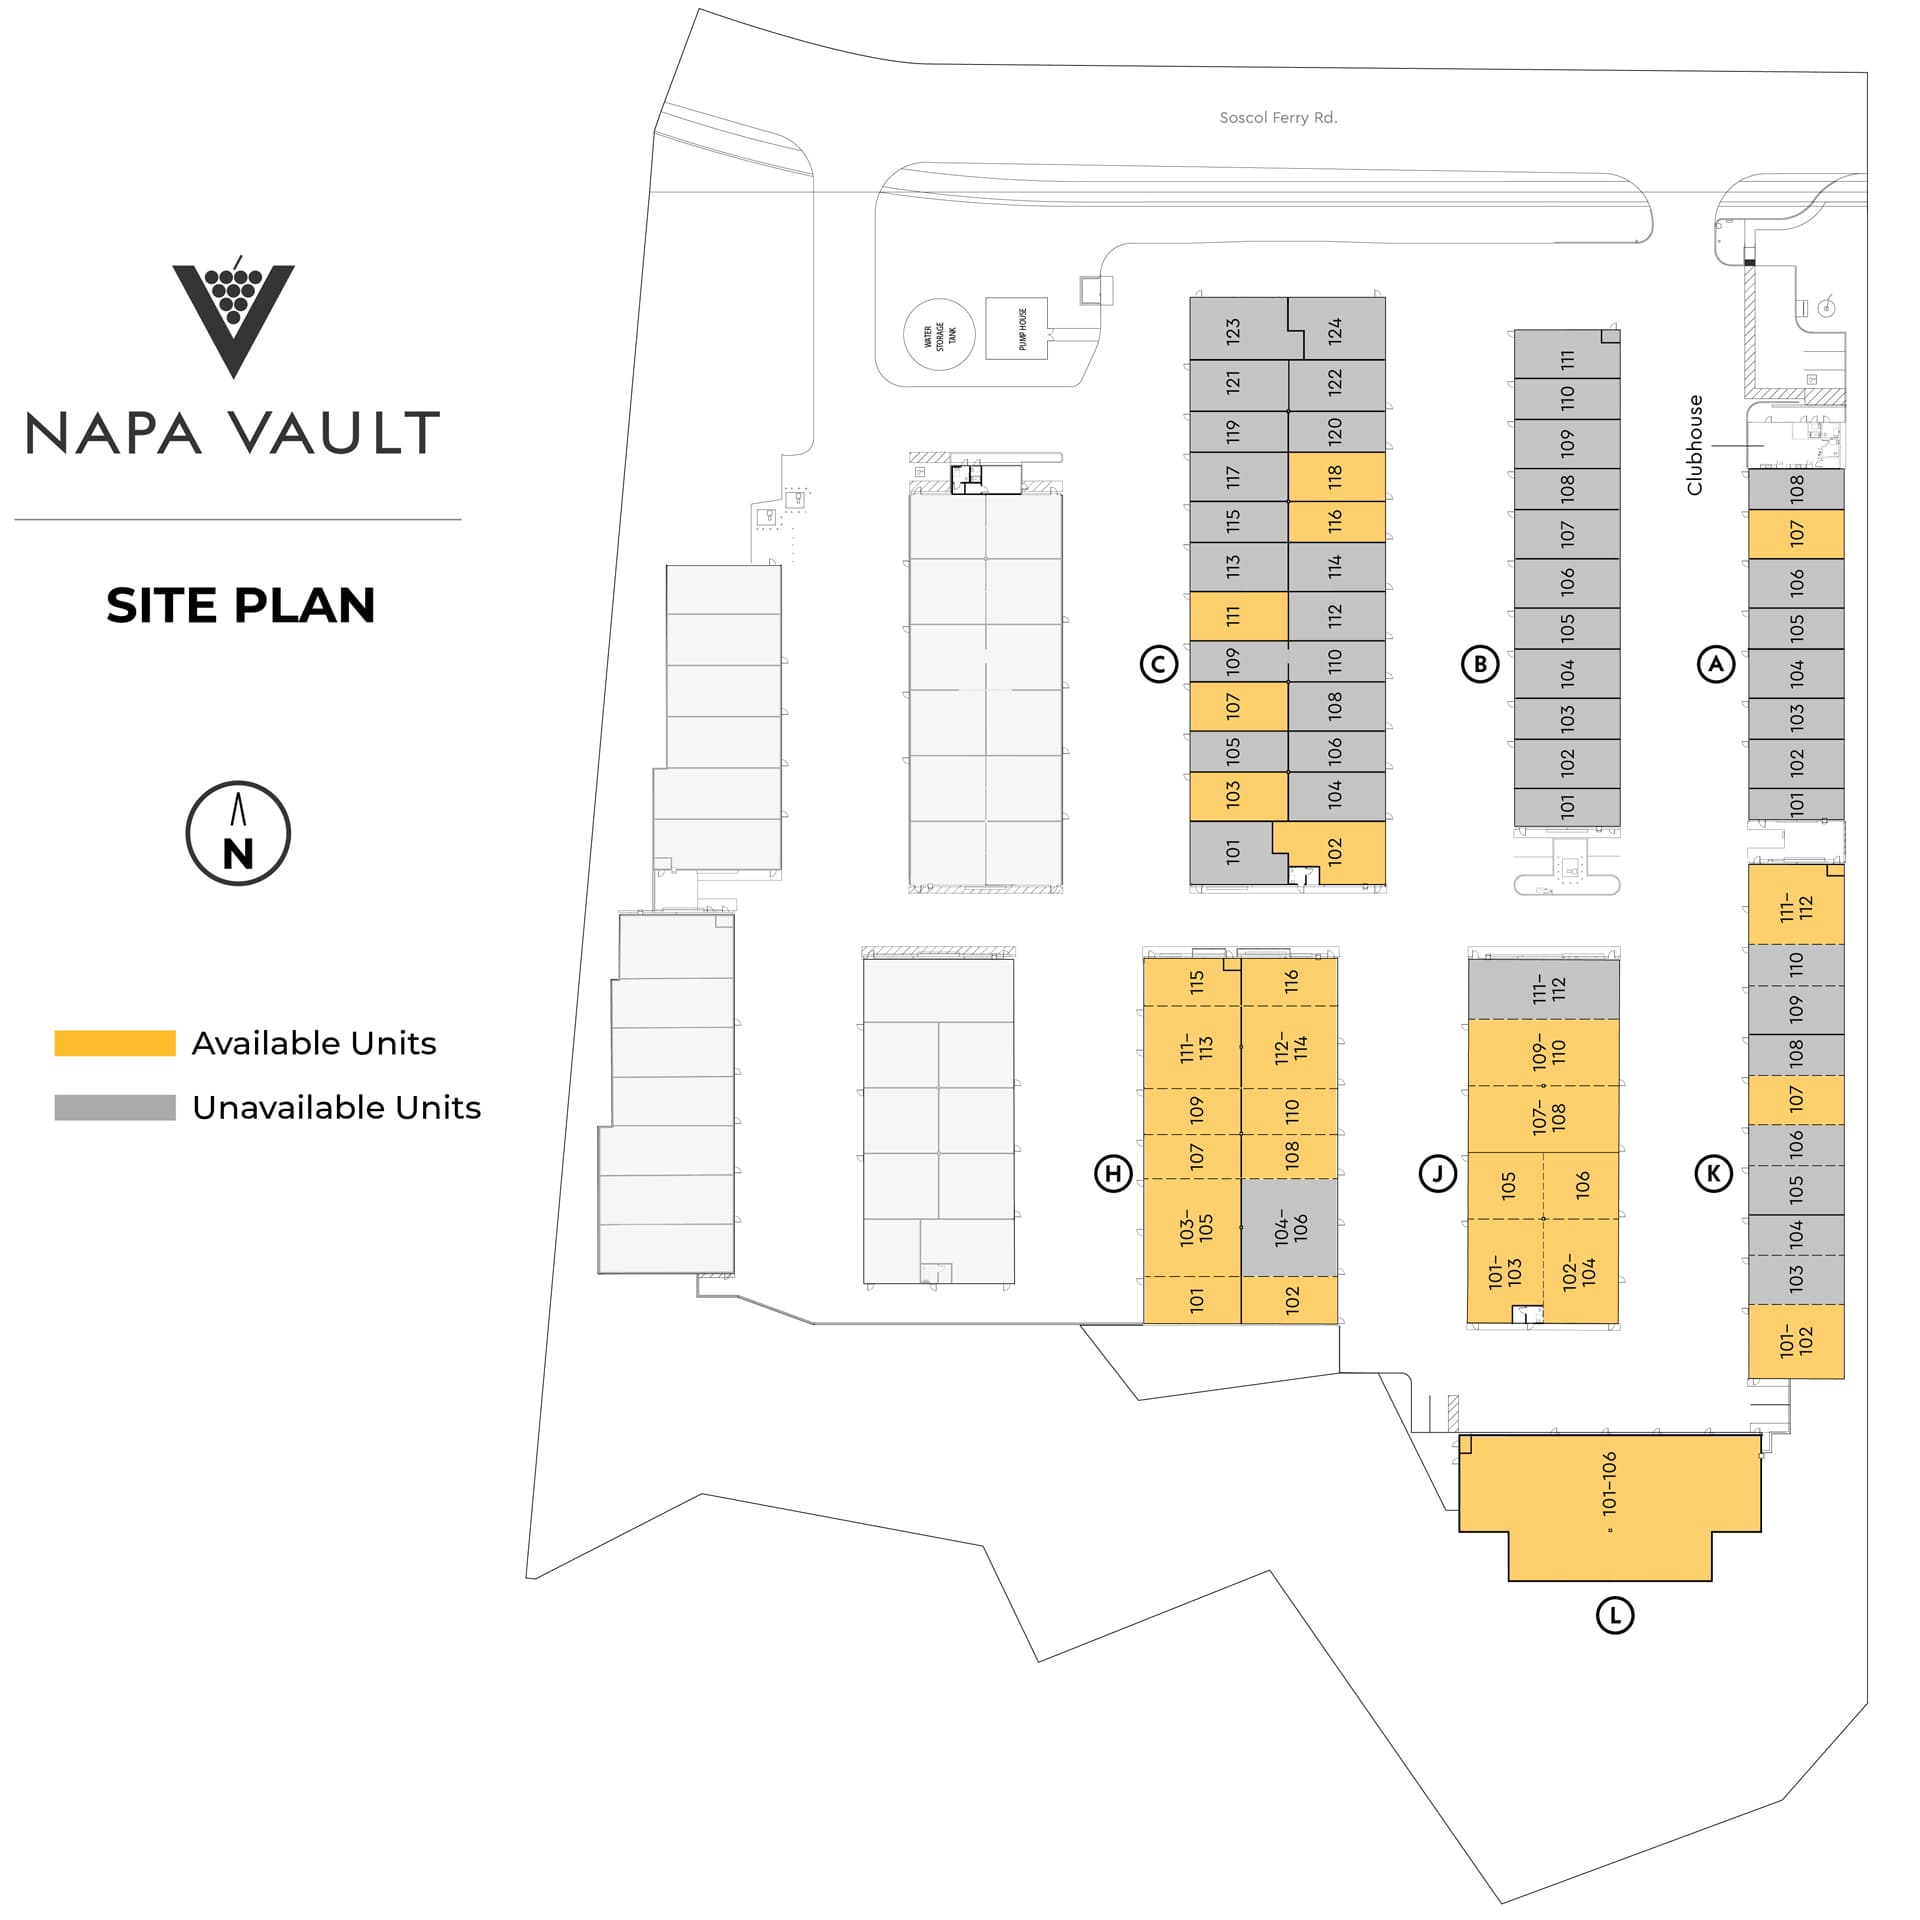 NAP-2208-Site Plan Graphic_pg 8rotated_availability